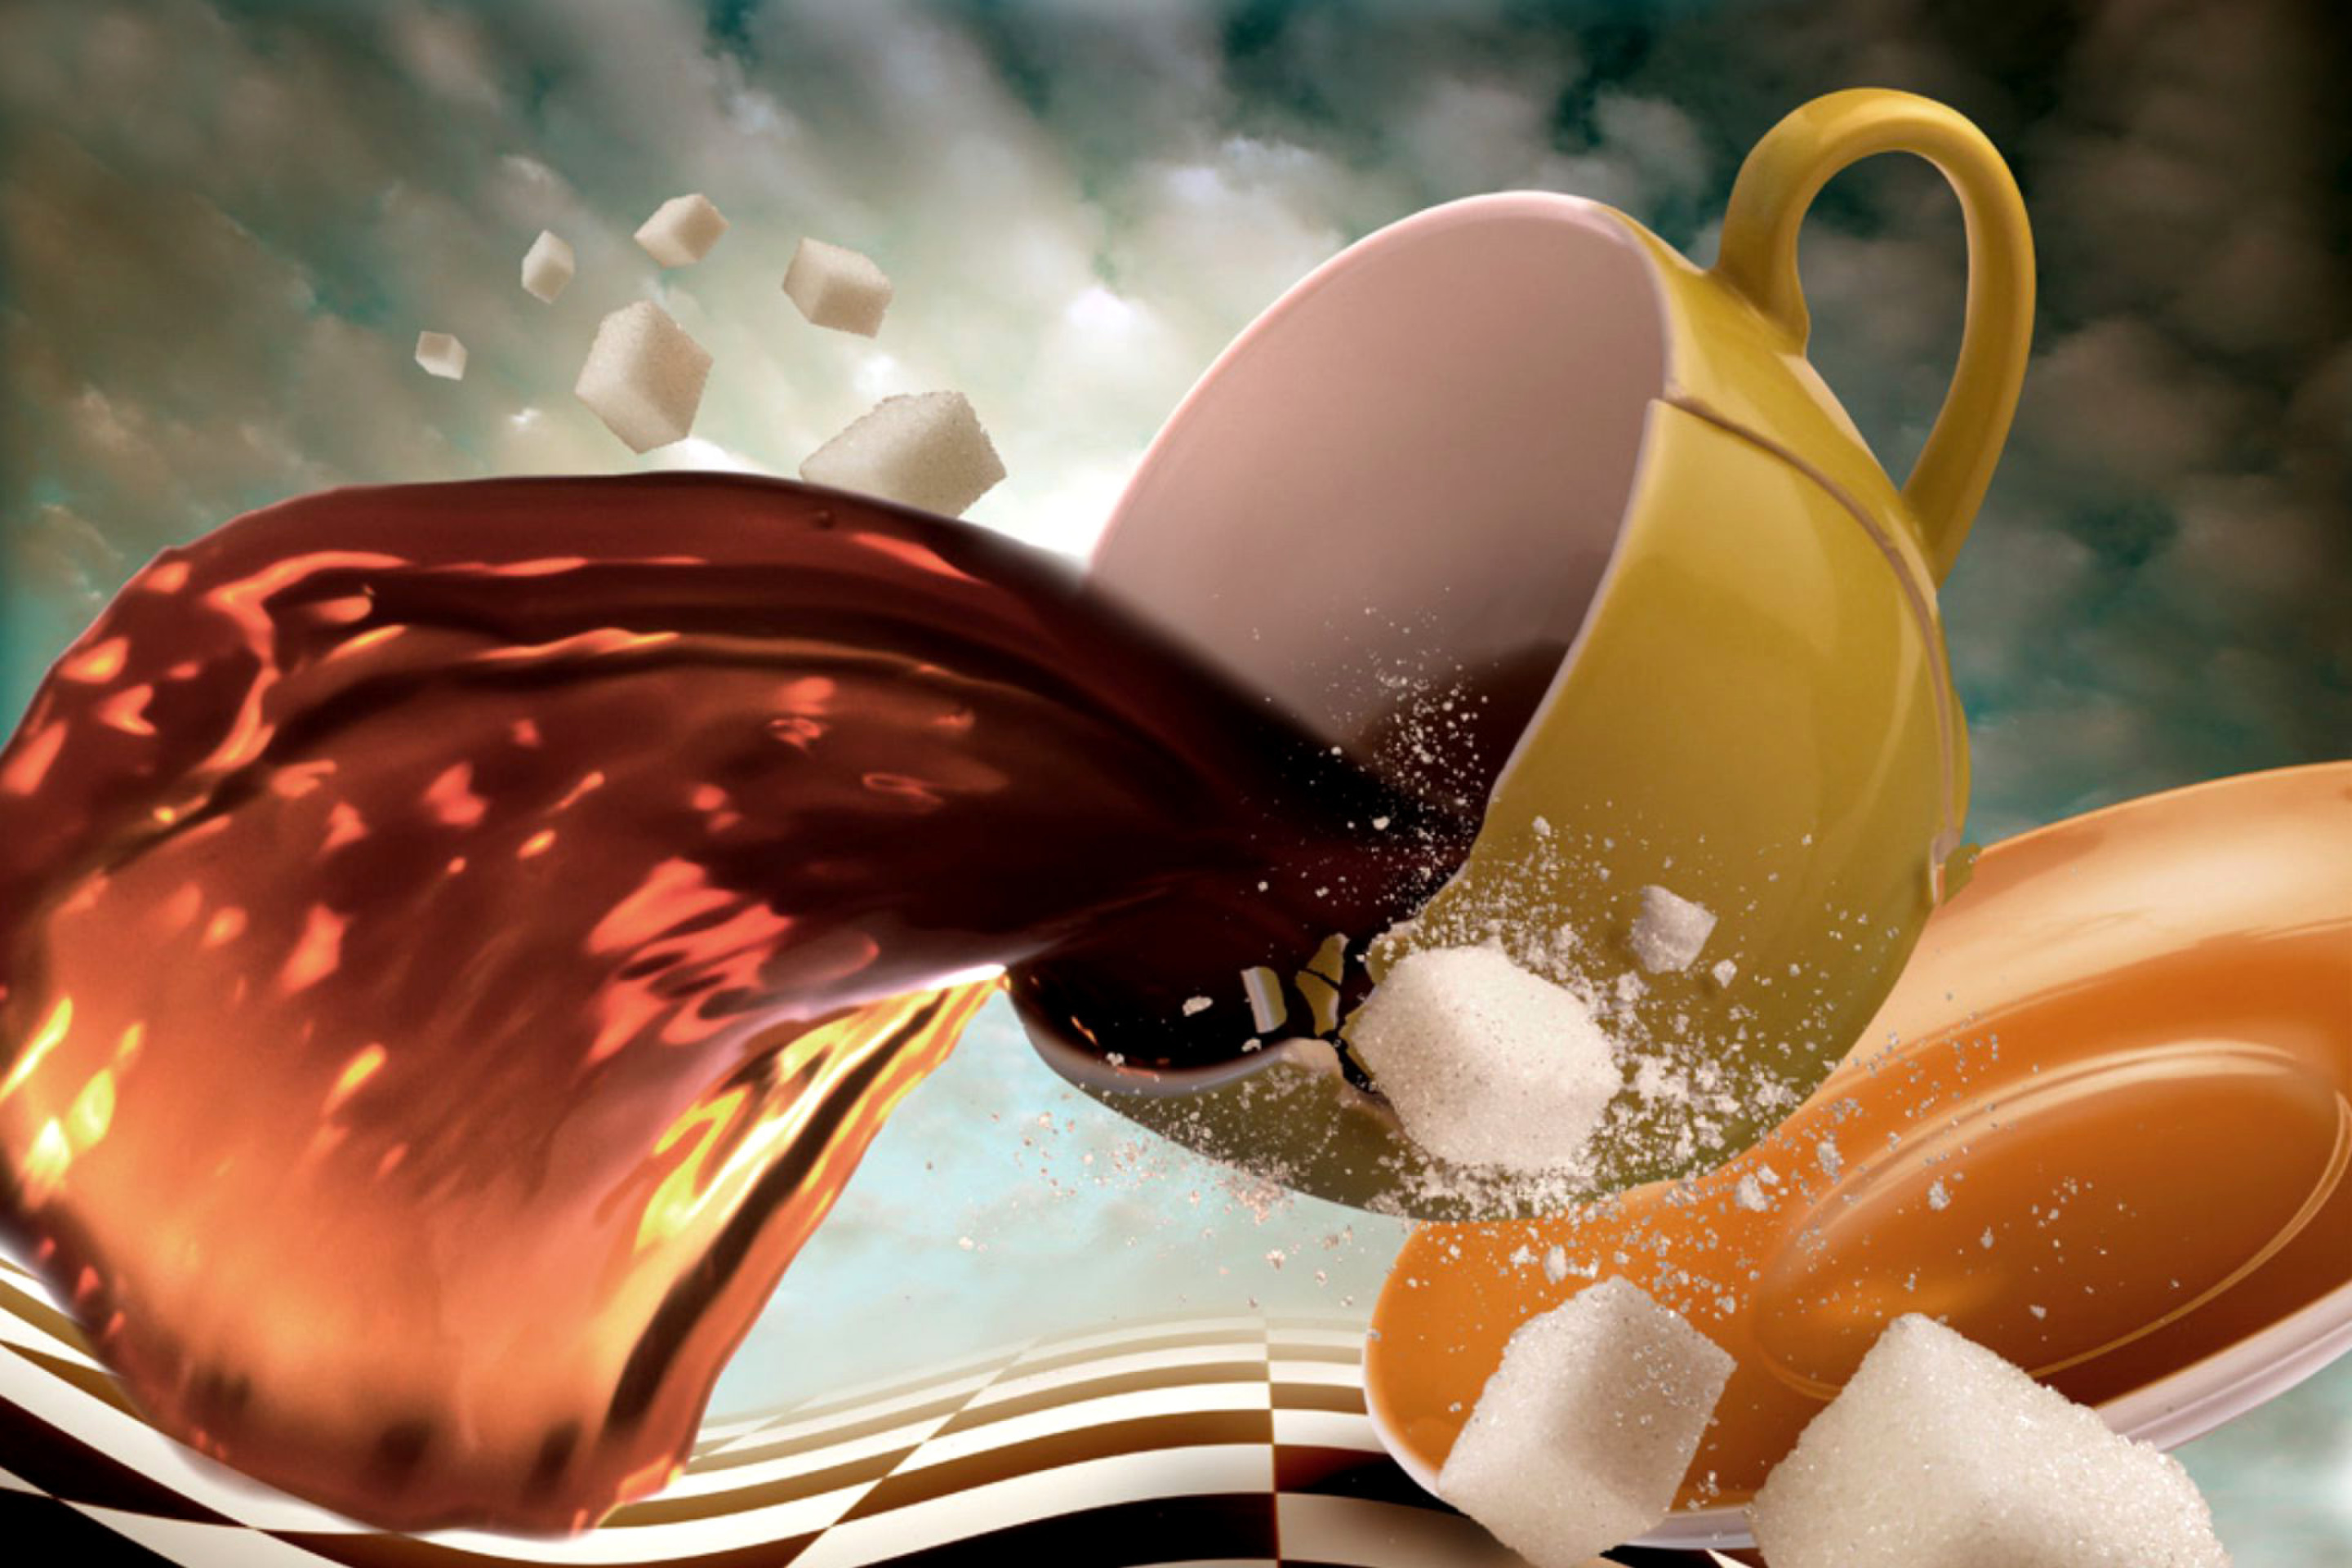 Surrealism Coffee Cup with Sugar cubes screenshot #1 2880x1920